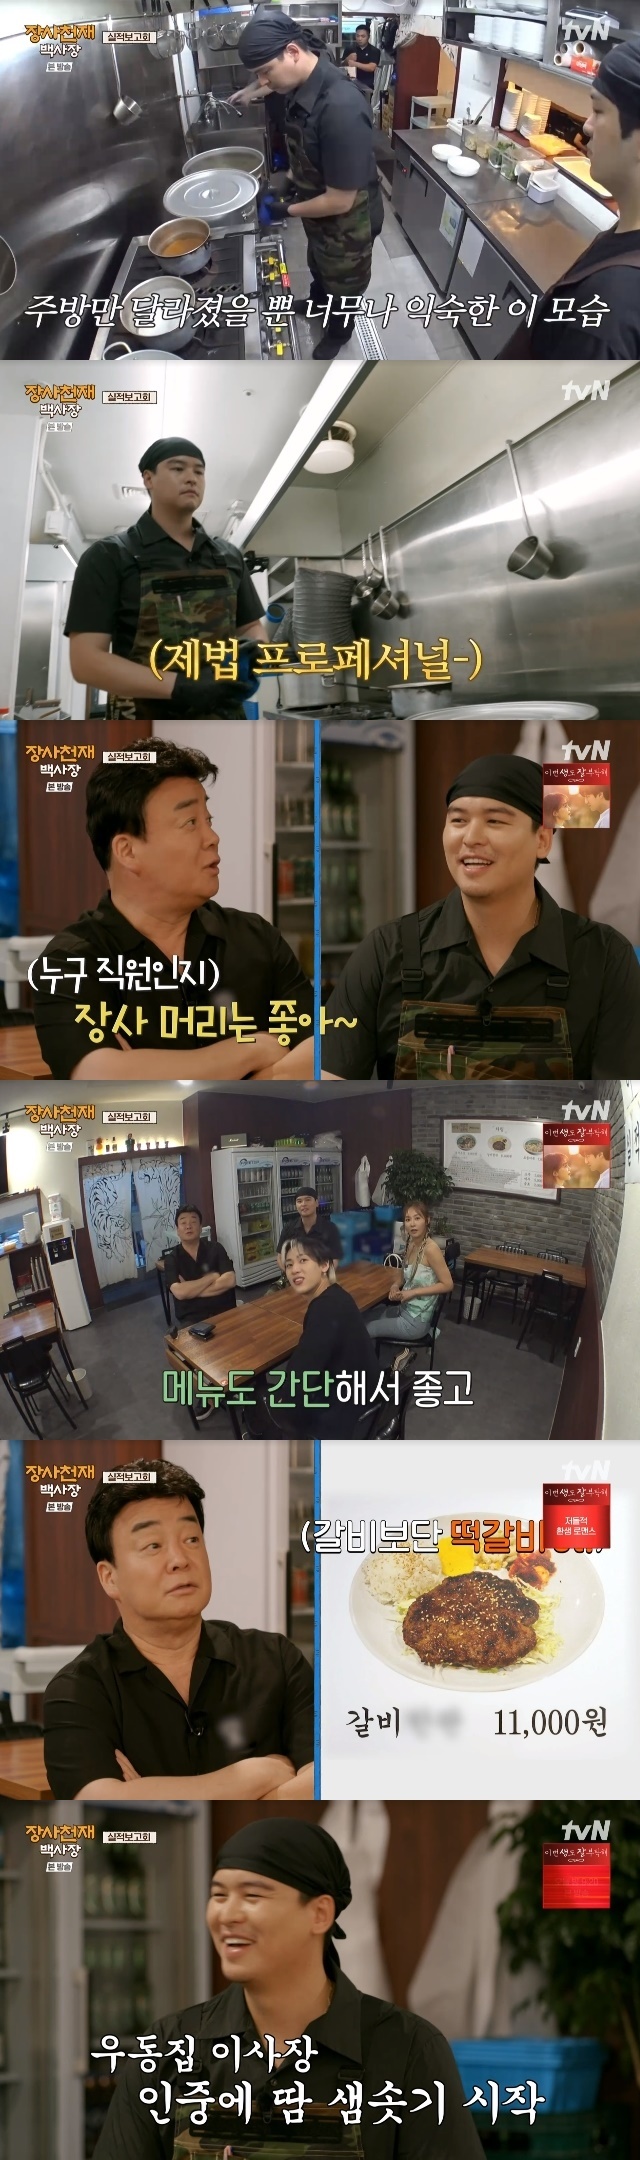 Baek Jong-won praises Lee Jang-woos Vic-Fezensac haircutIn the 13th TVN entertainment white sand beach of jangsa genius broadcasted on June 25, an earnings report meeting was held at Lee Jang-woos udon house.On this day, Lee Jang-woo appeared bustling with a heavy appearance in his own udon house The Kitchen.Lee Jang-woo, who travels to The Kitchen so familiarly that only The Kitchen has changed, has attracted the attention of a professional boss.Baek Jong-won, who entered Lee Jang-woos shop afterwards, praised it as Hey shop is beautiful. Then, Are you doing this on purpose?Vic-Fezensacs hair is good, he said.Baek Jong-won continued to look inside the shop and said, Its good because the menu is simple. (But) the ribs are a bit confusing. I have to change the name of the rice cake.If its tteokgalbi, then I might think of something fancy, so Ill have to choose a name. If you buy me a drink, Ill give you a name, he said.